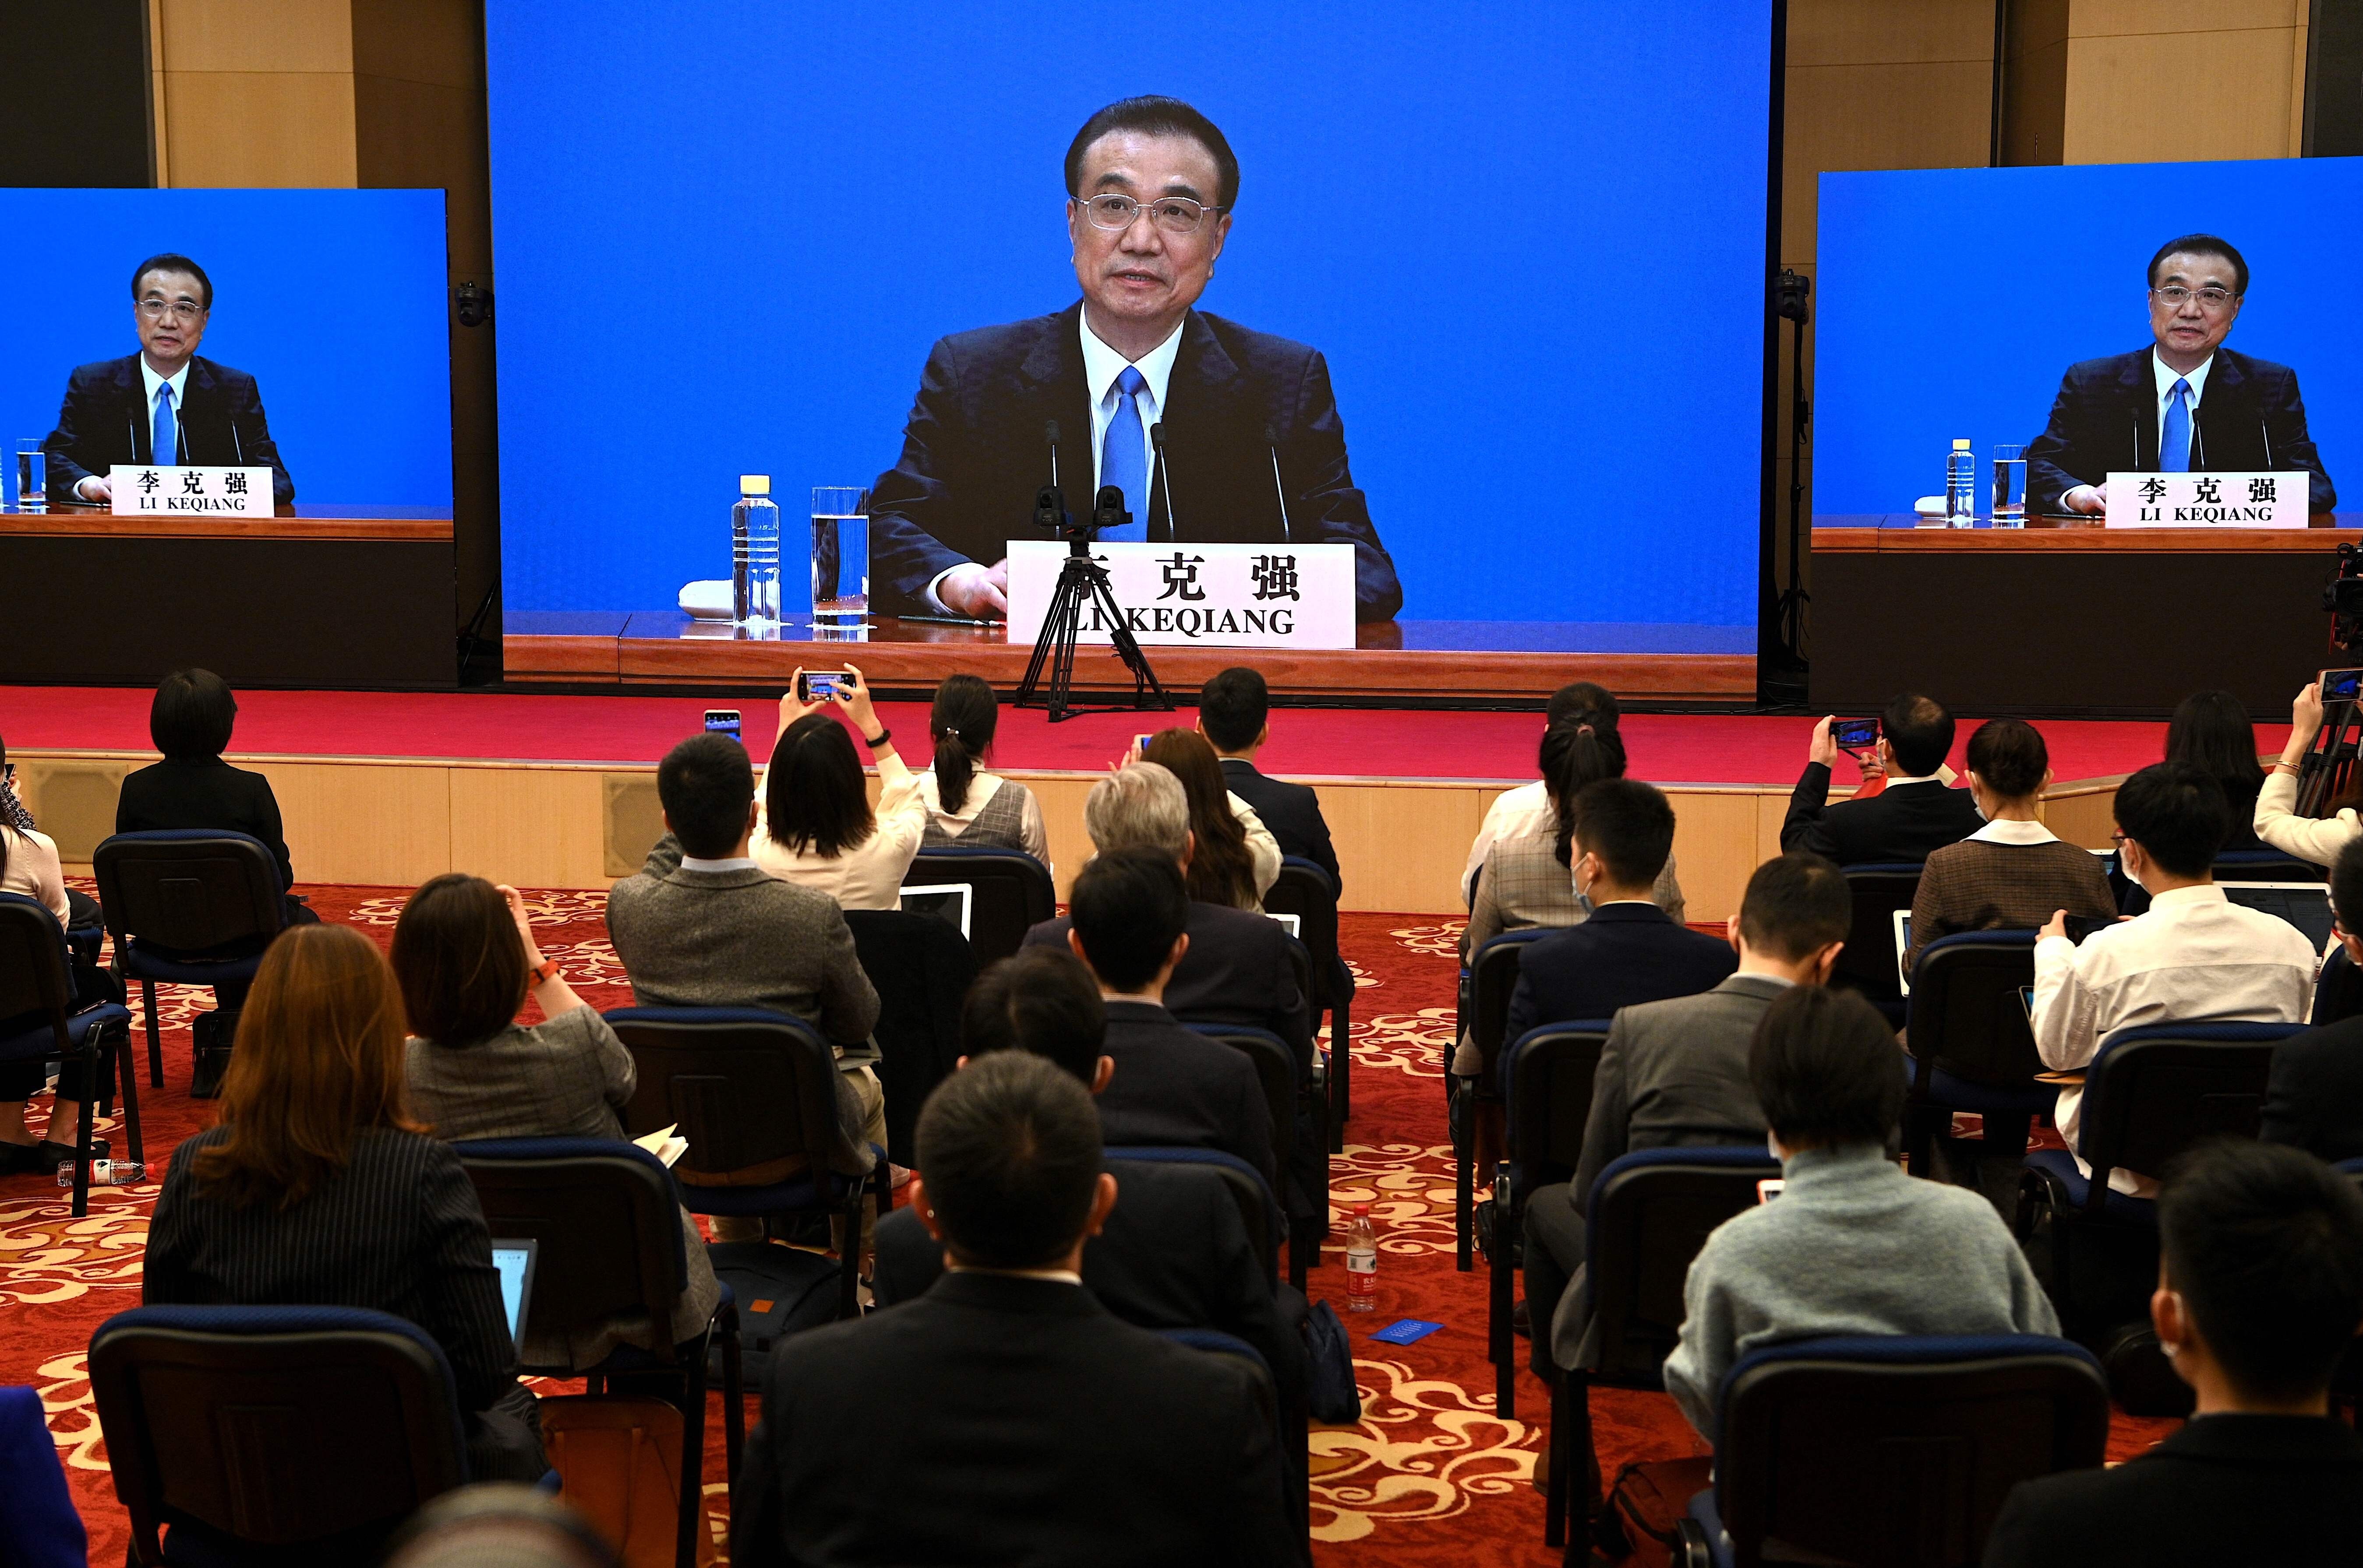 Chinese Premier Li Keqiang says a growth rate of above 6 per cent leaves room for ‘considerable uncertainty’ involving the economic rebound in China. Photo: AFP